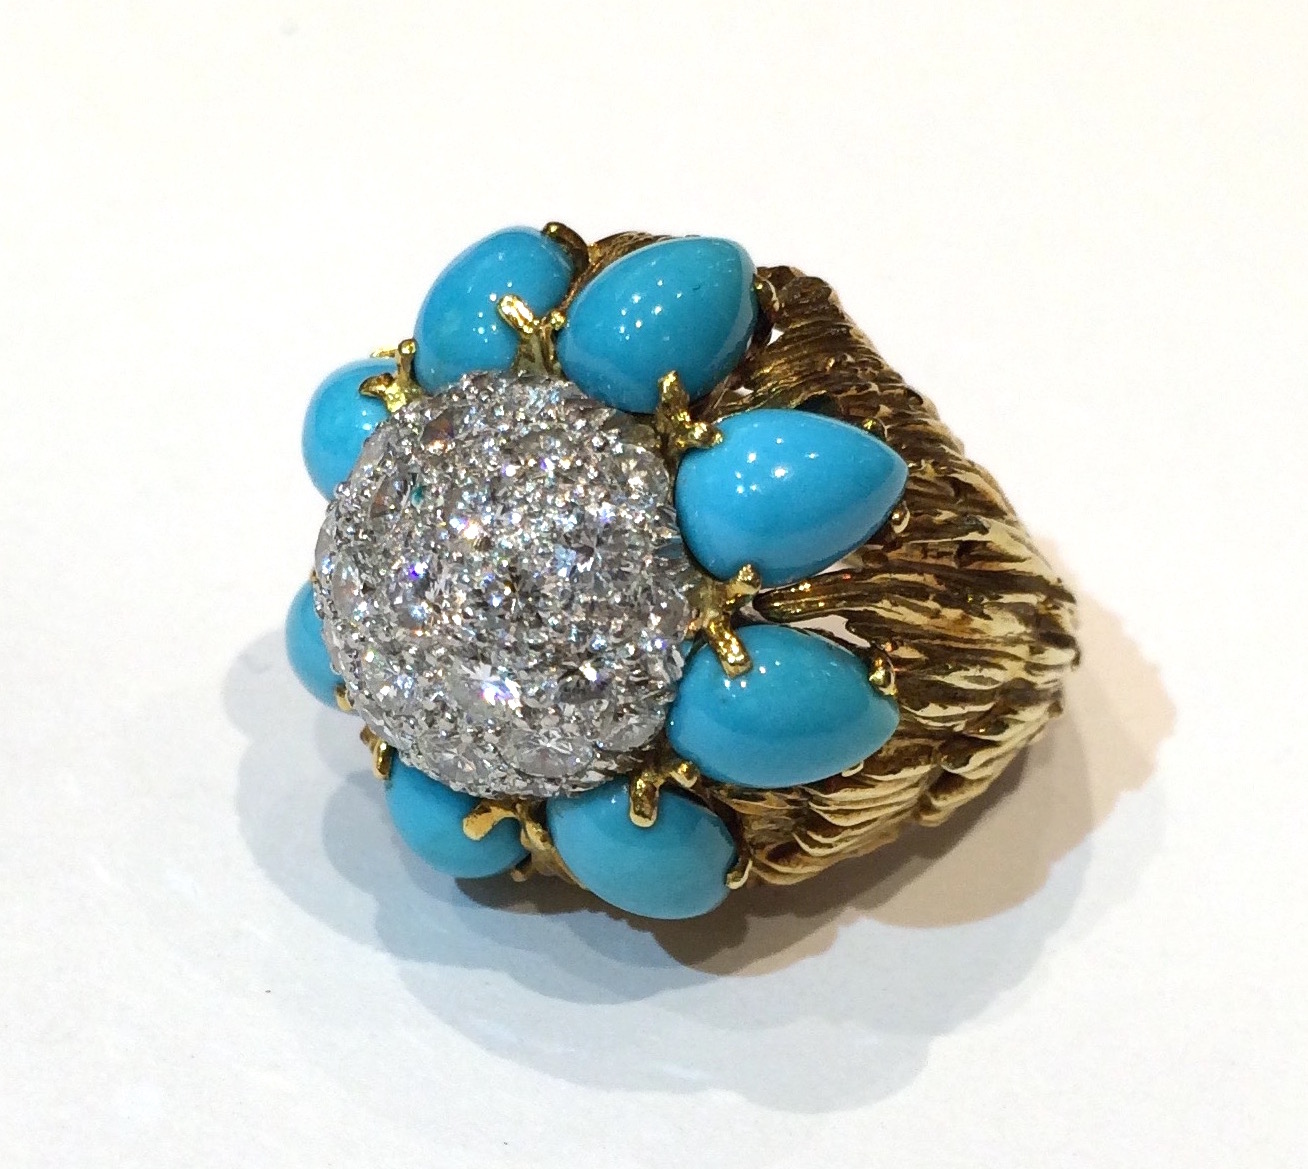 Verdura, Highly textured 18K gold ring set with teardrop shaped turquoises and a convex center of pave diamonds, marked, c. 1950